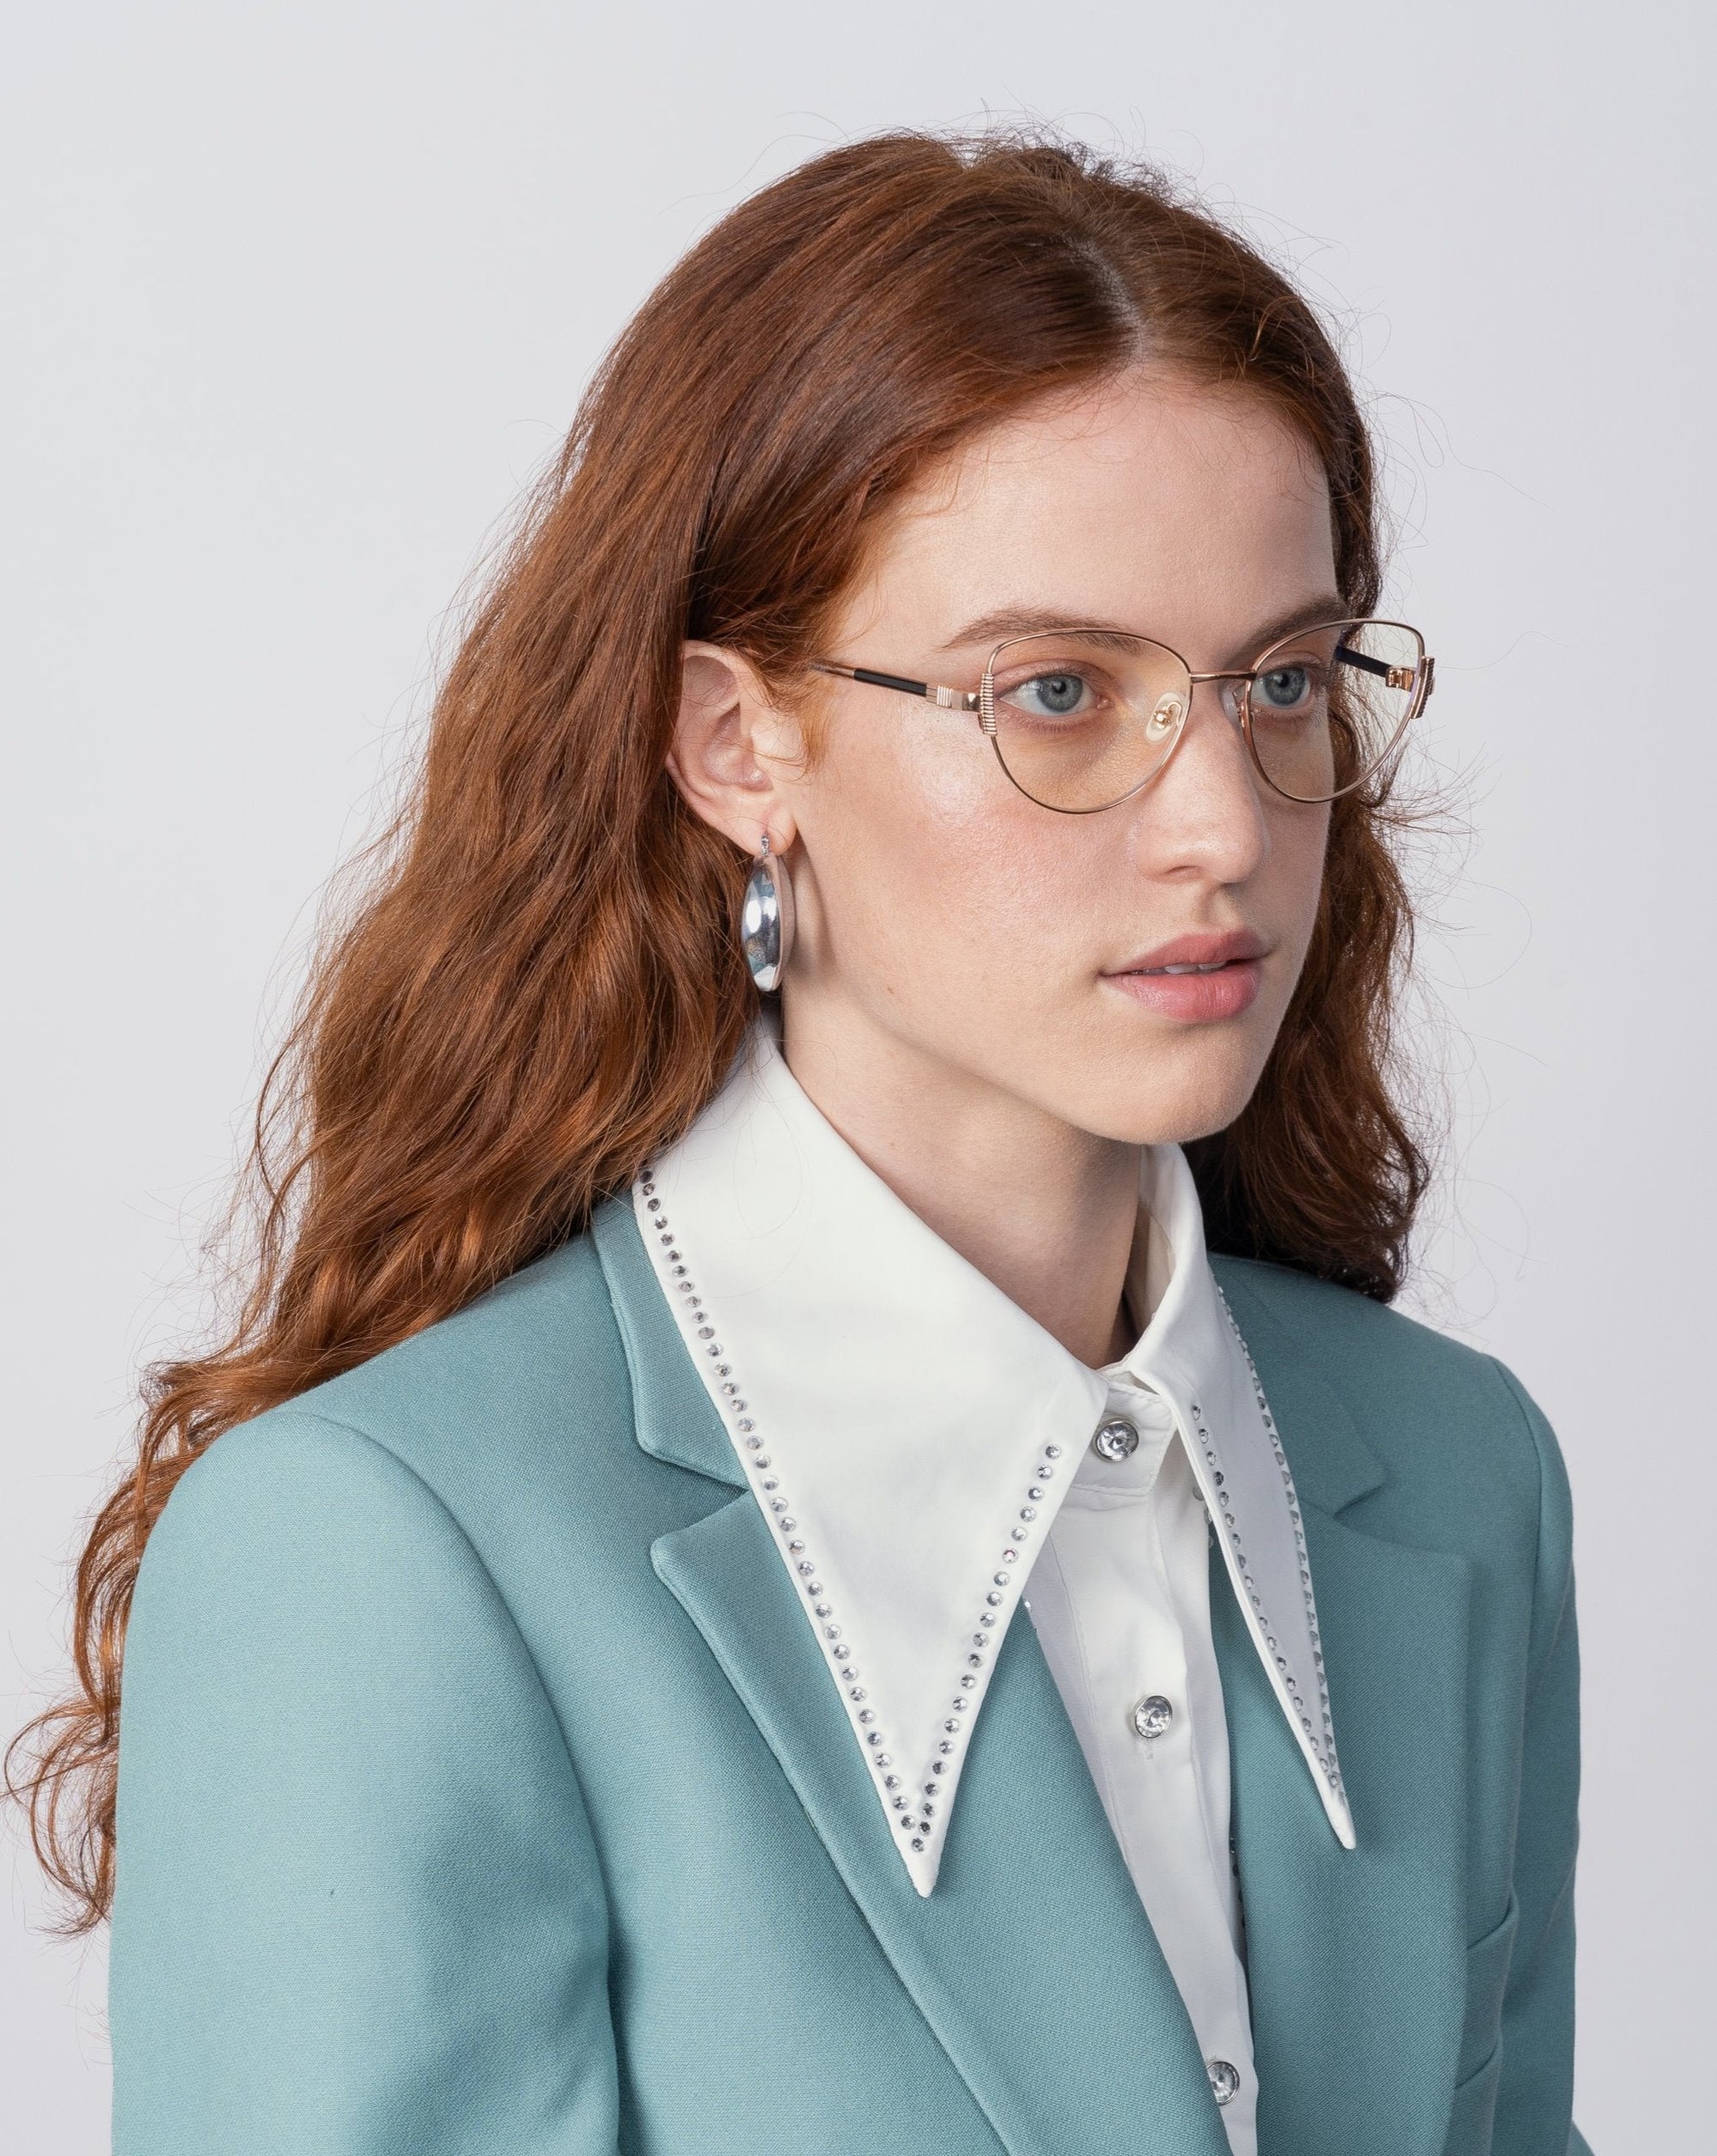 A woman with long, wavy red hair is wearing Dante eyeglasses from For Art's Sake® with blue light filter lenses, silver hoop earrings, and a light blue blazer over a white shirt with a wide, pointed collar. She is looking slightly to the side against a plain, light background.